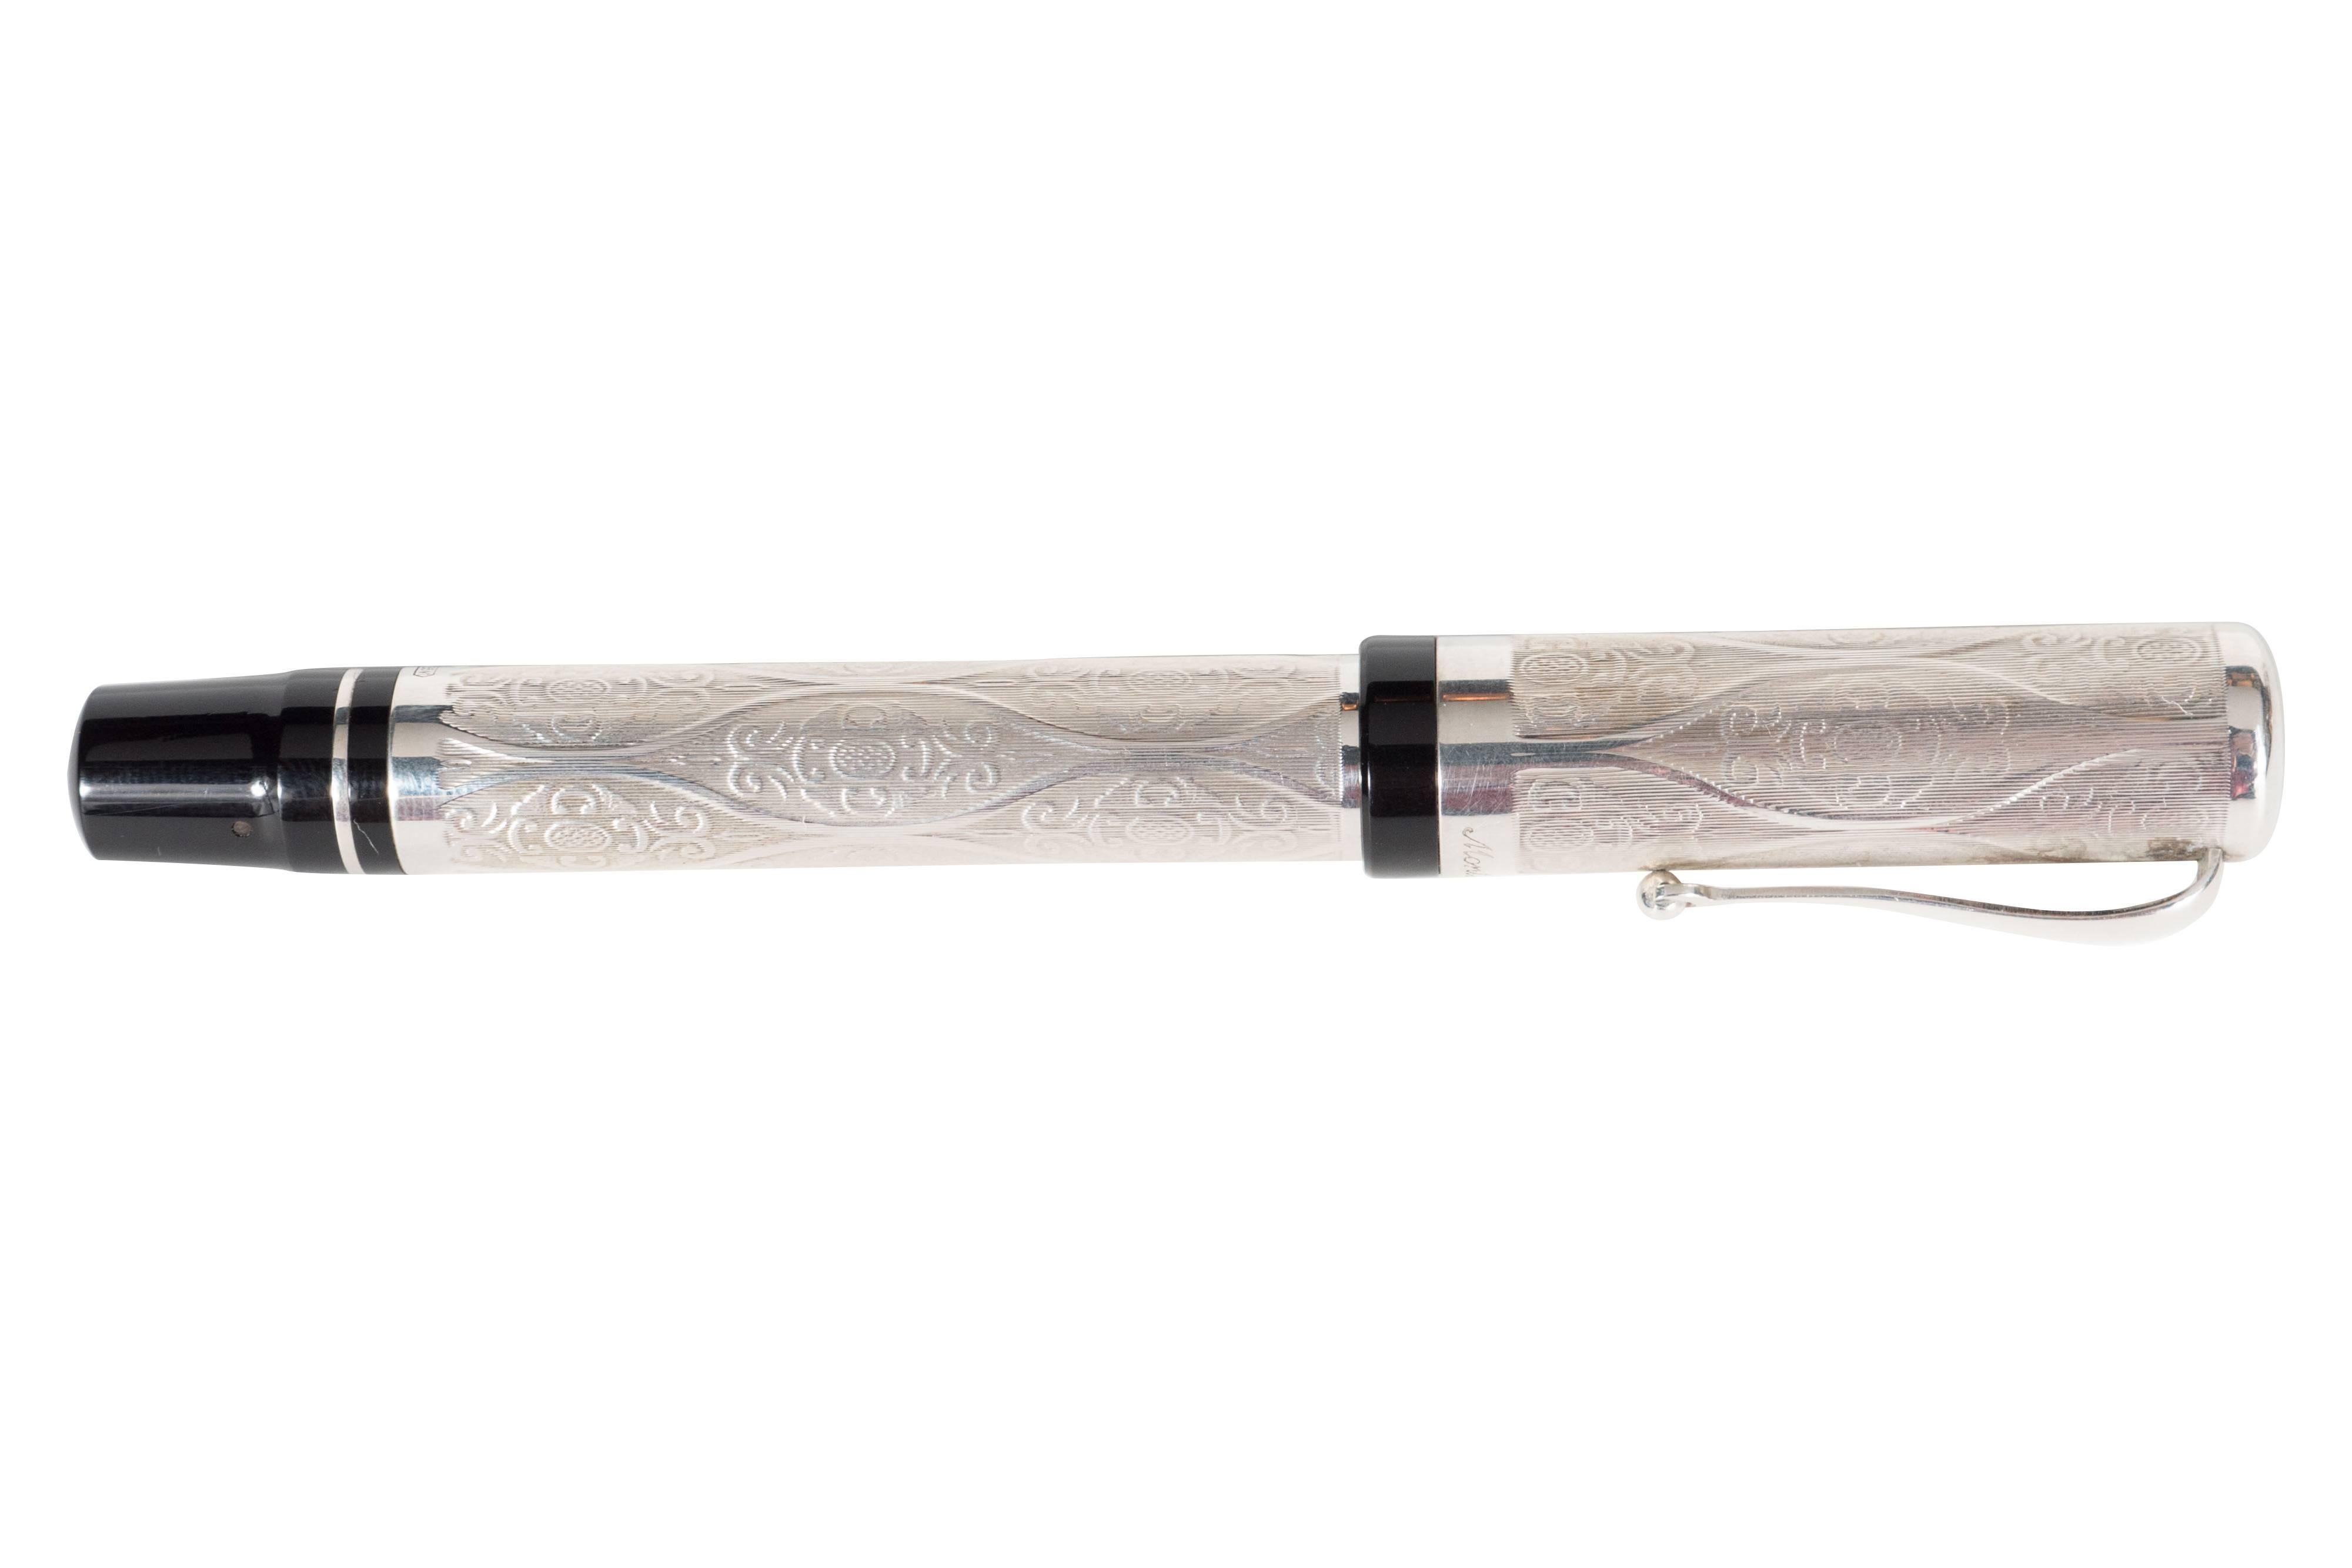 A Montegrappa limited edition Cosmopolitan Baroque sterling silver fountain pen. Intricate etched Baroque-style detailing adorns the pen and removable cap. This was a limited edition of 500 ever produced. Cap piece is signed 